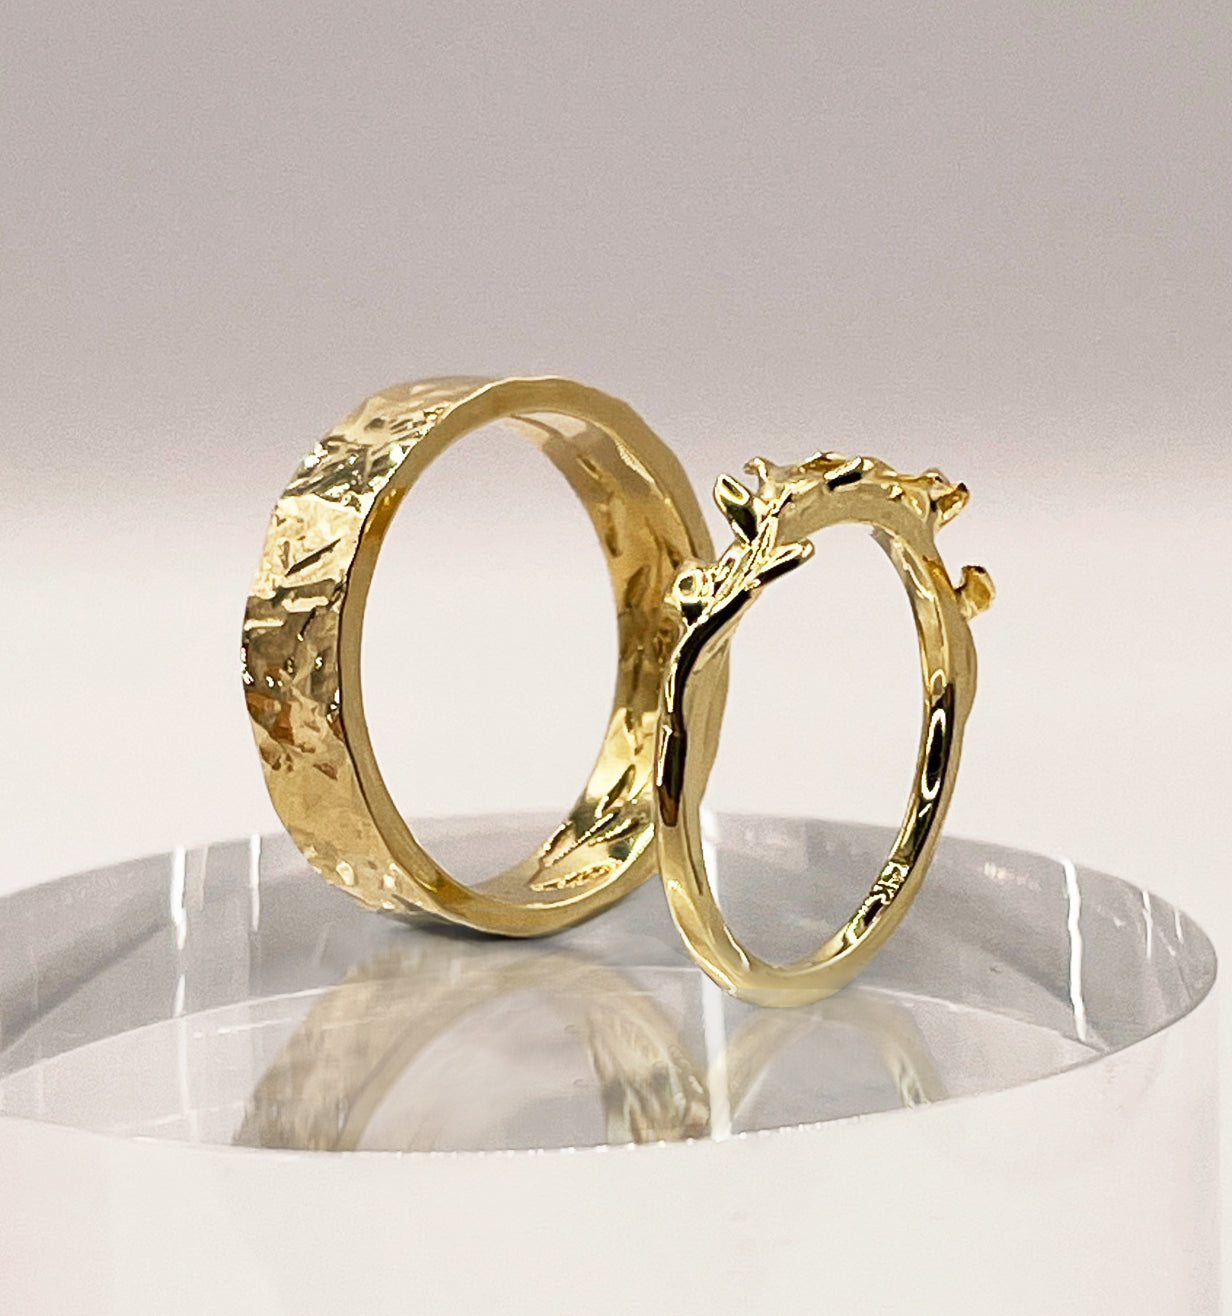 Unique Leaves and Vines Matching Wedding Ring Set for Couples (2 pieces) -Gold Leaves Rings